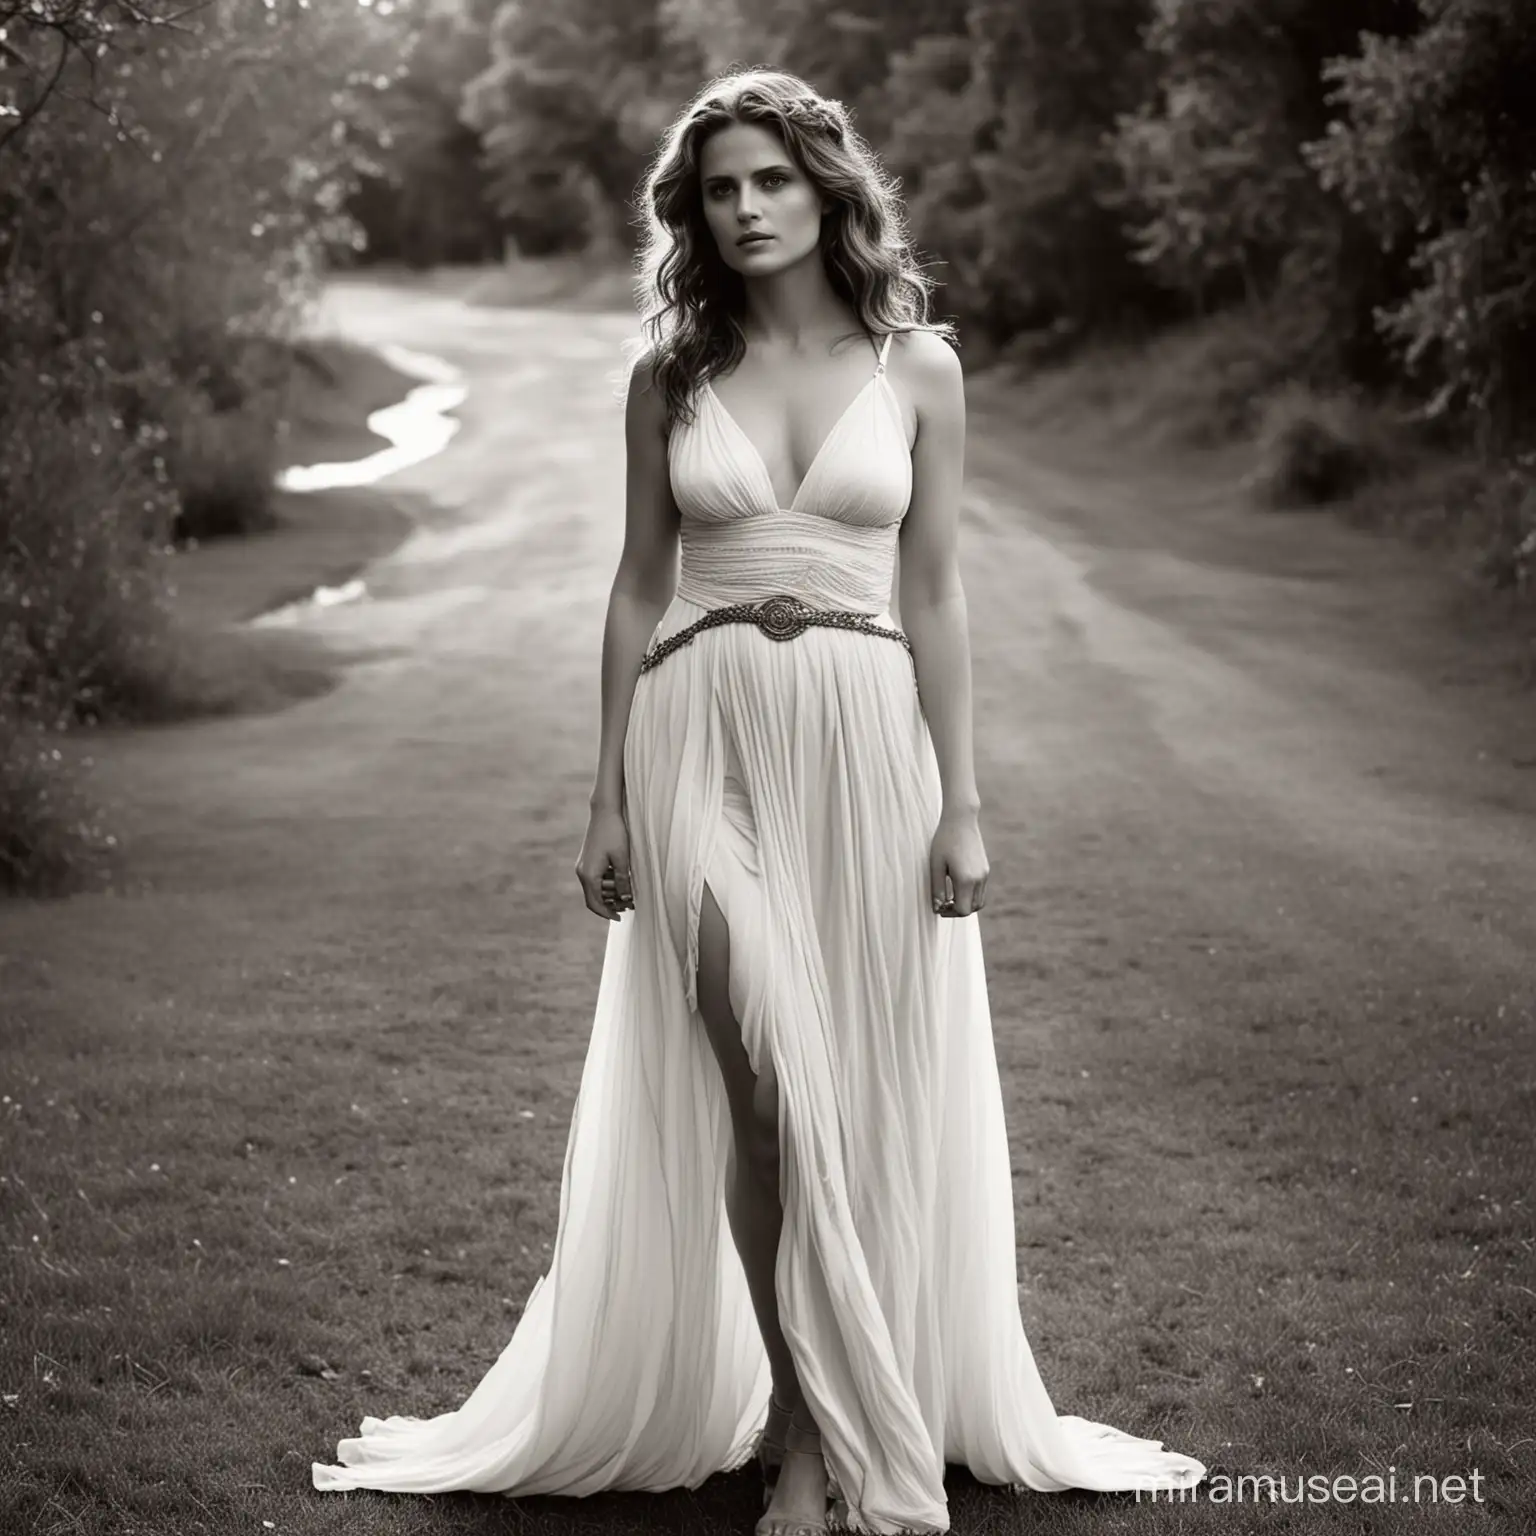 Goddess Aphrodite Portrayed by Stana Katic in Full Body View from the Back